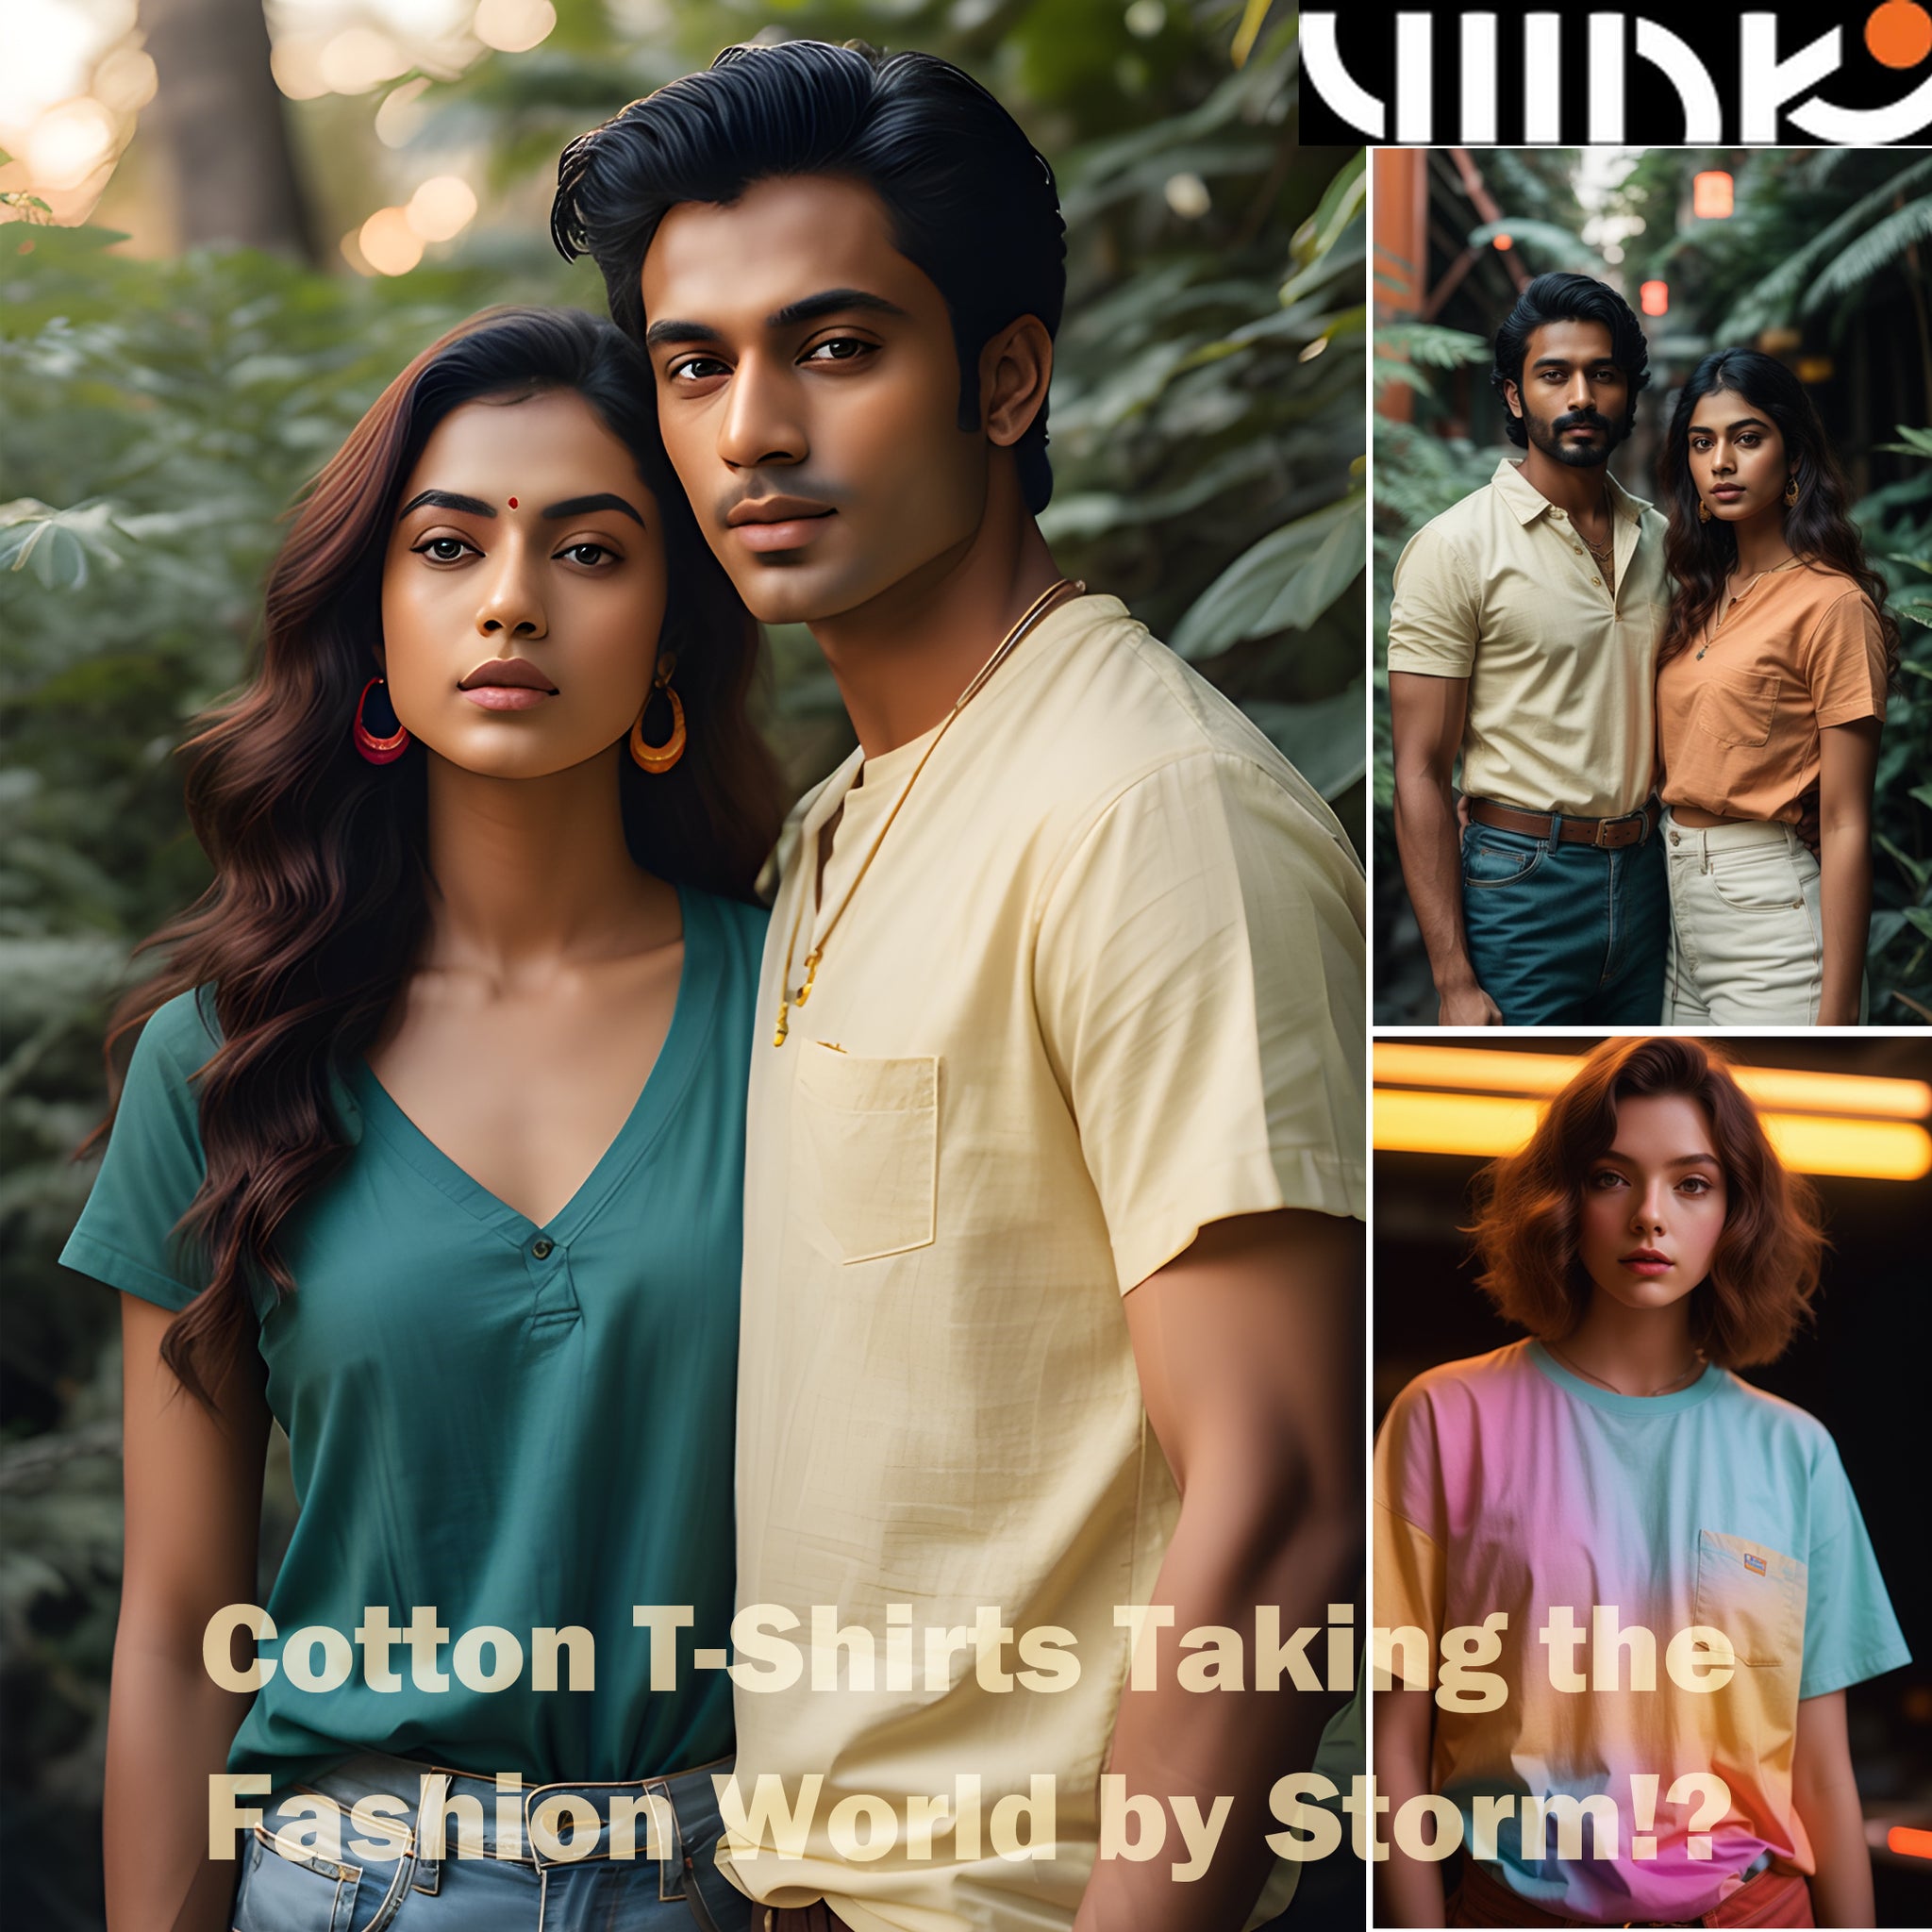 Why are Cotton T-Shirts Taking the Fashion World by Storm?